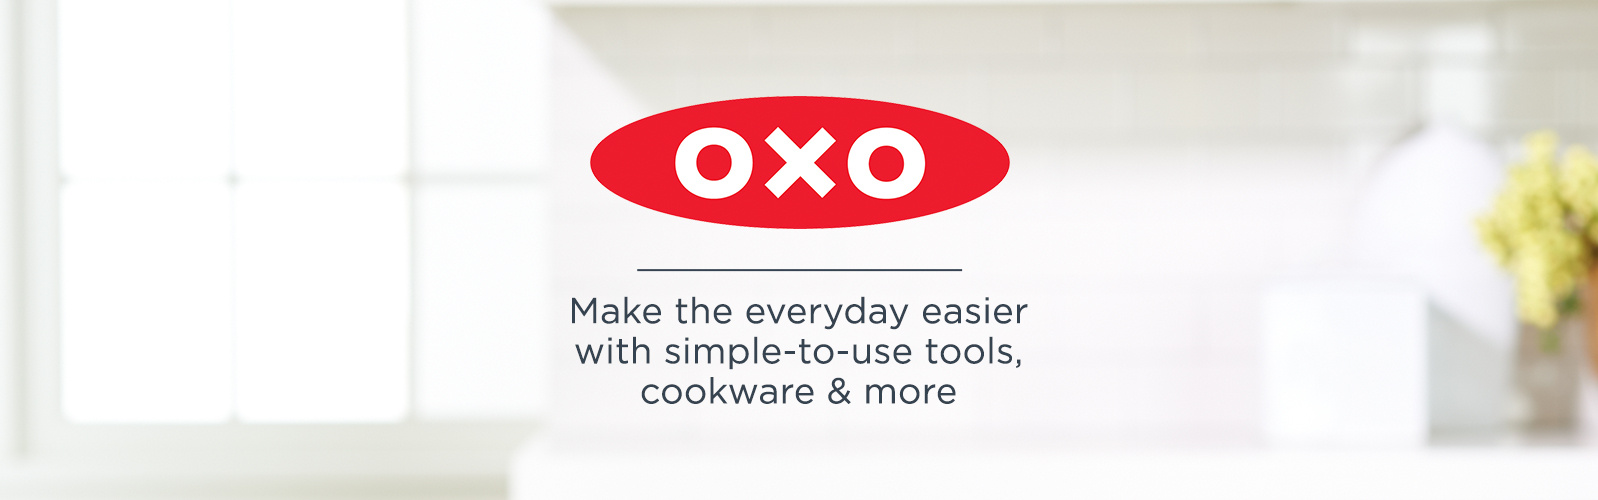 OXO.  Make the everyday easier with simple-to-use tools, cookware & more 